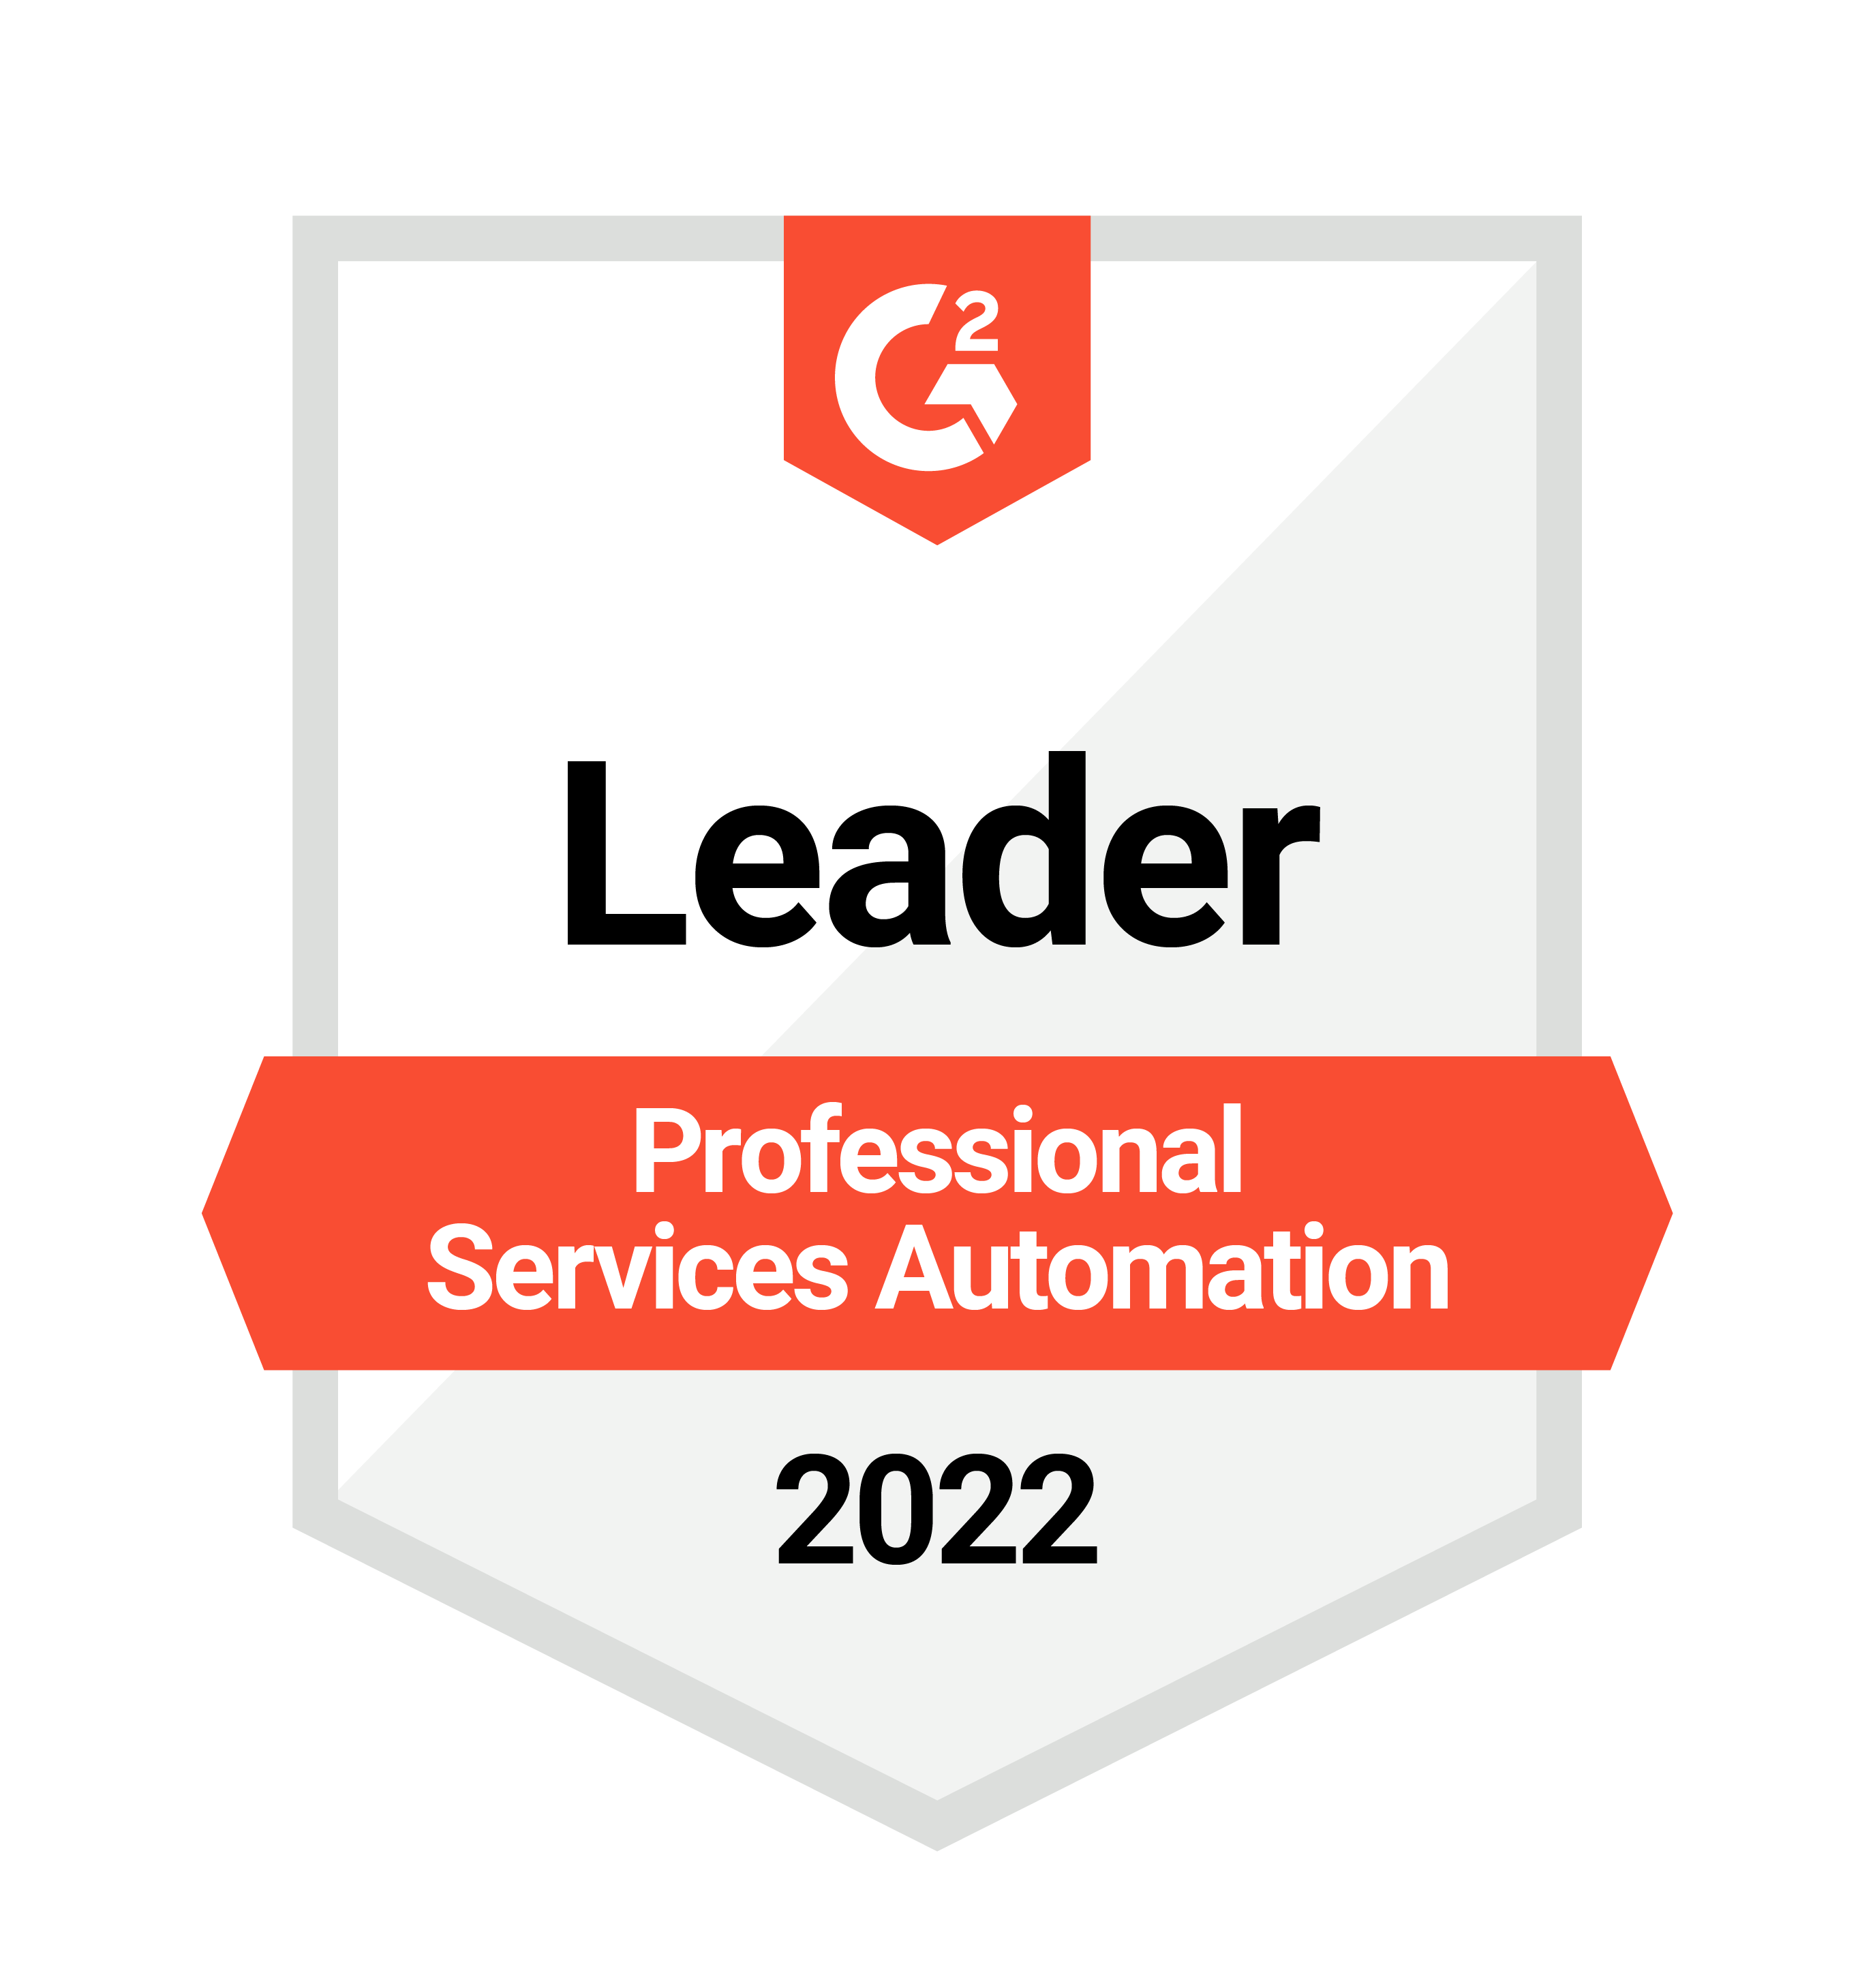 G2 Leader in Professional Services Automation